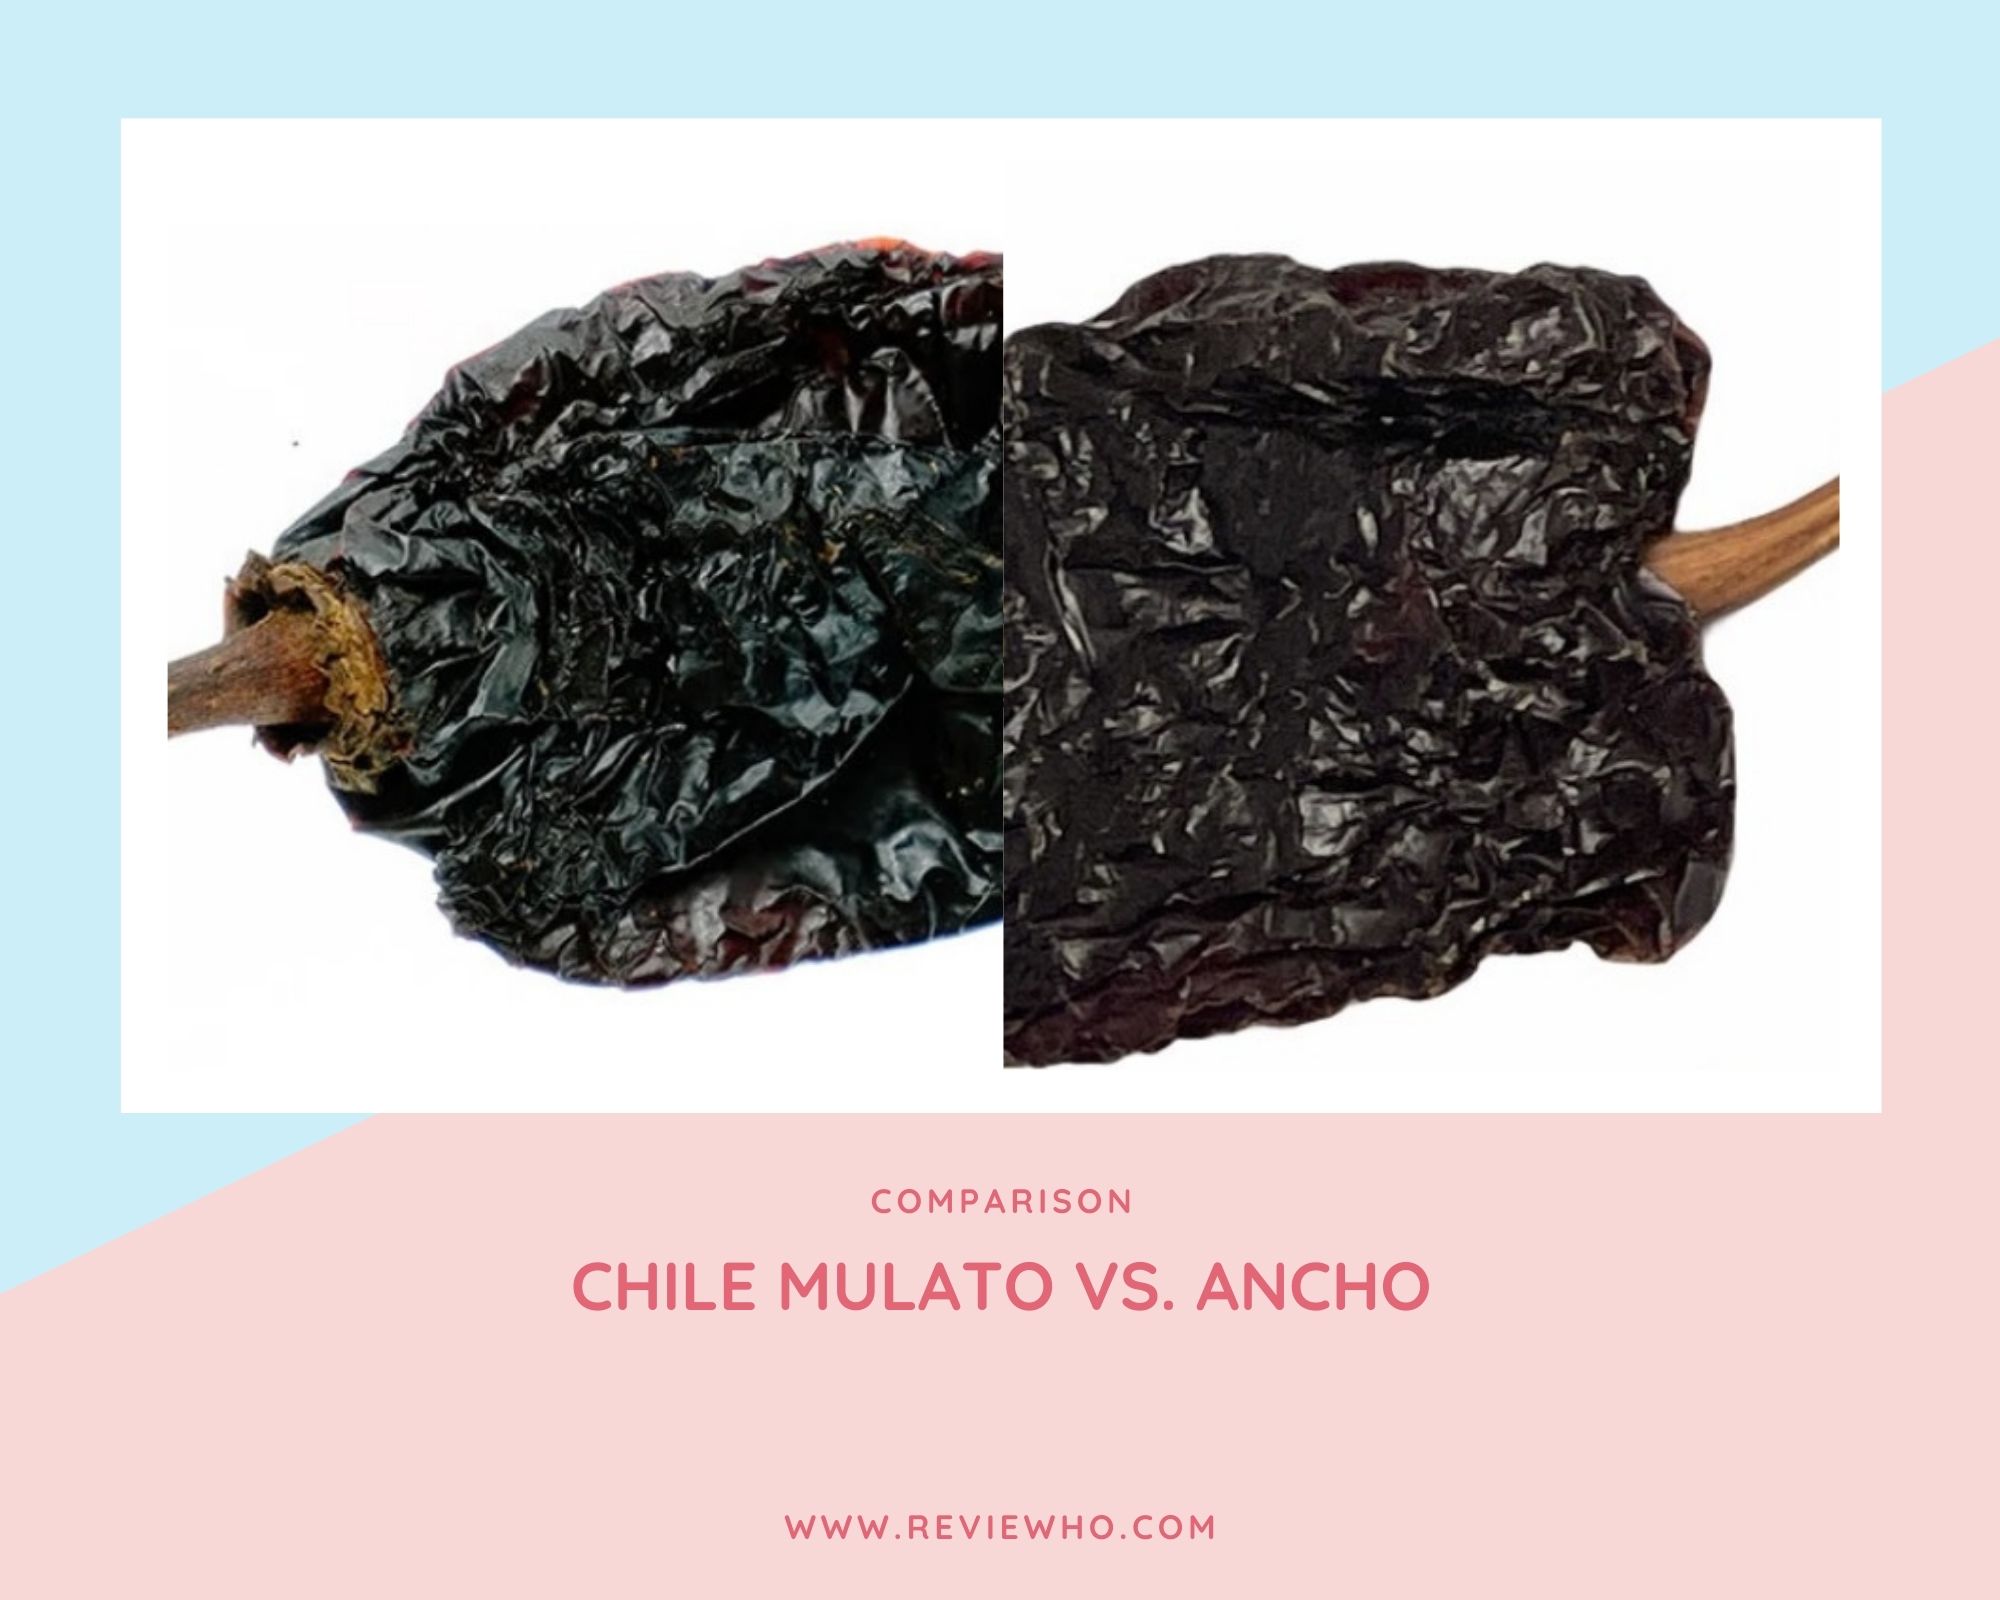 Difference Between Chile Mulato and Ancho